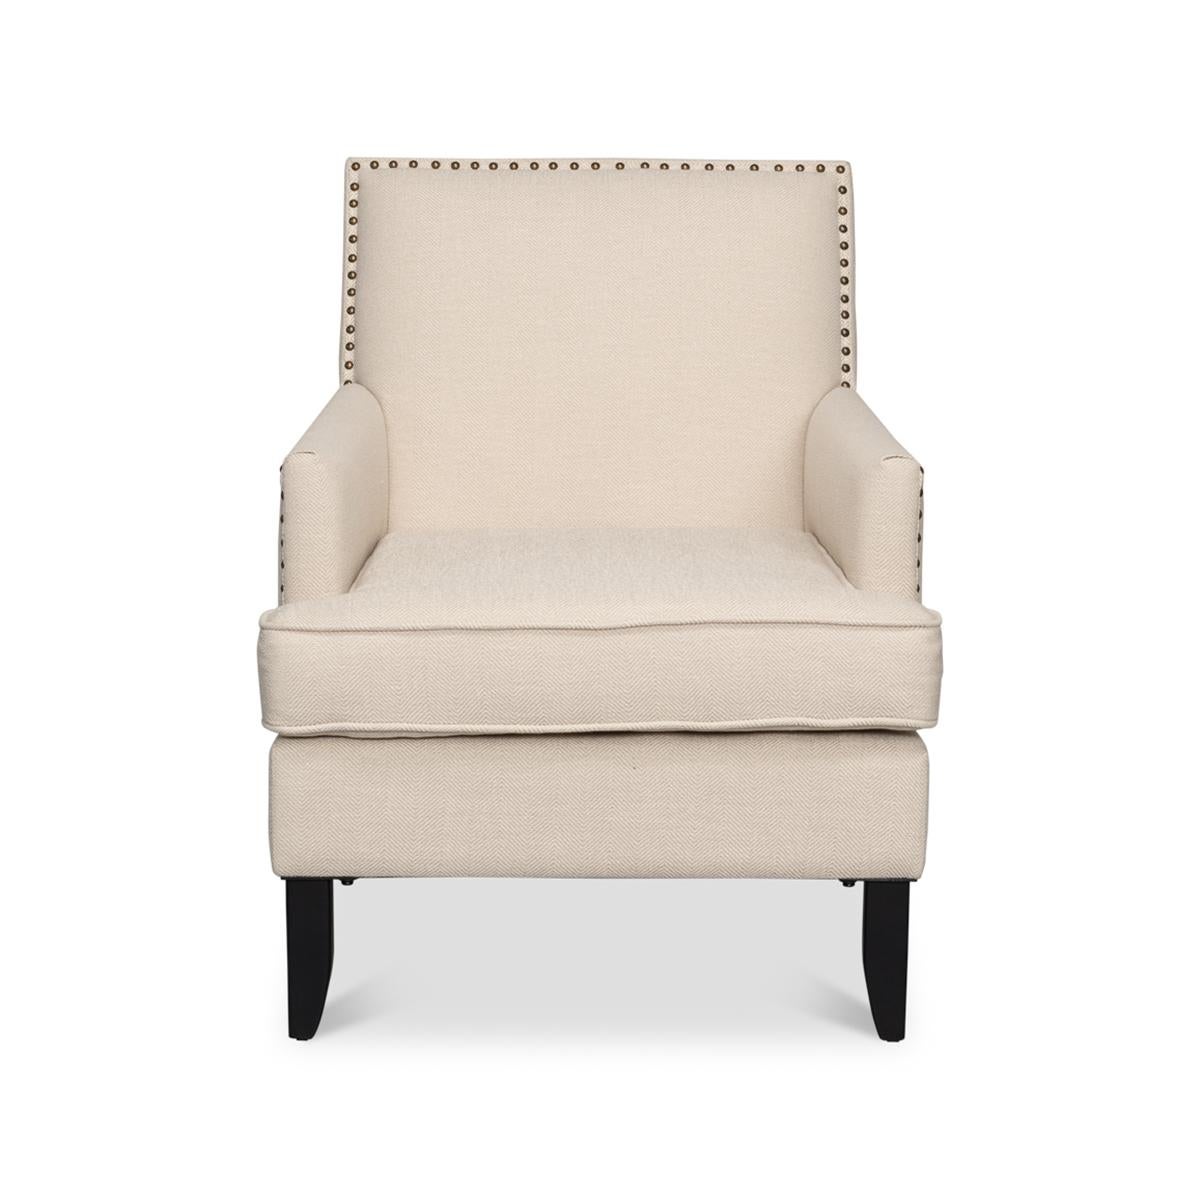 Transitional Upholstered Armchair, with a solid maple ebonized frame and ivory linen fabric, with an upholstered cushion backrest and seat cushion having large brass nailhead detailing.

Dimensions: 27